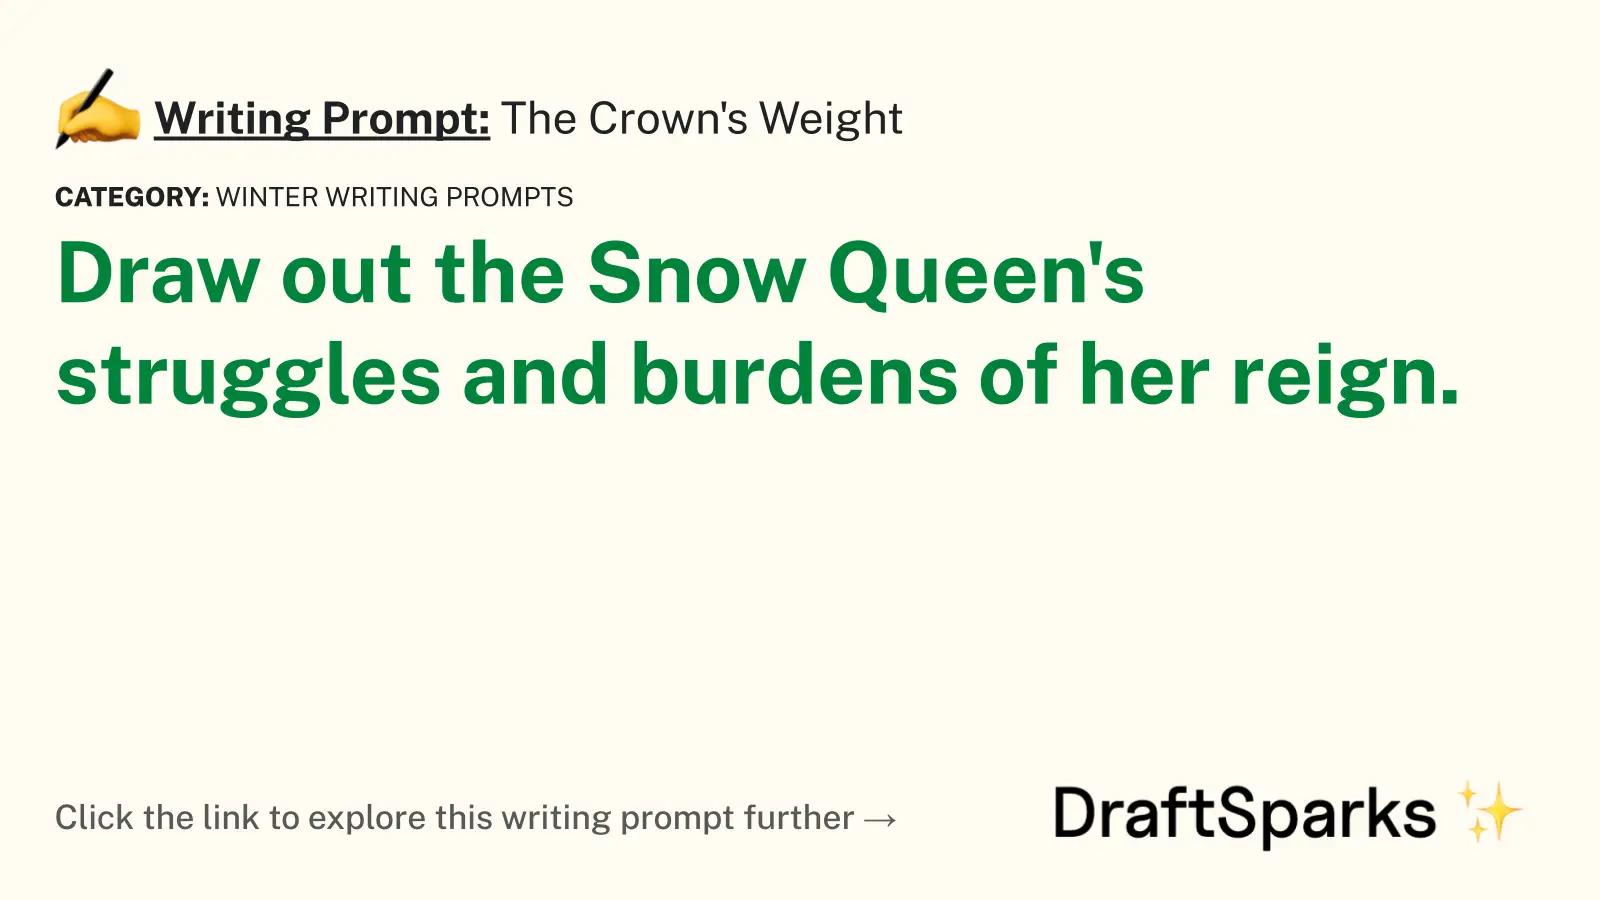 The Crown’s Weight